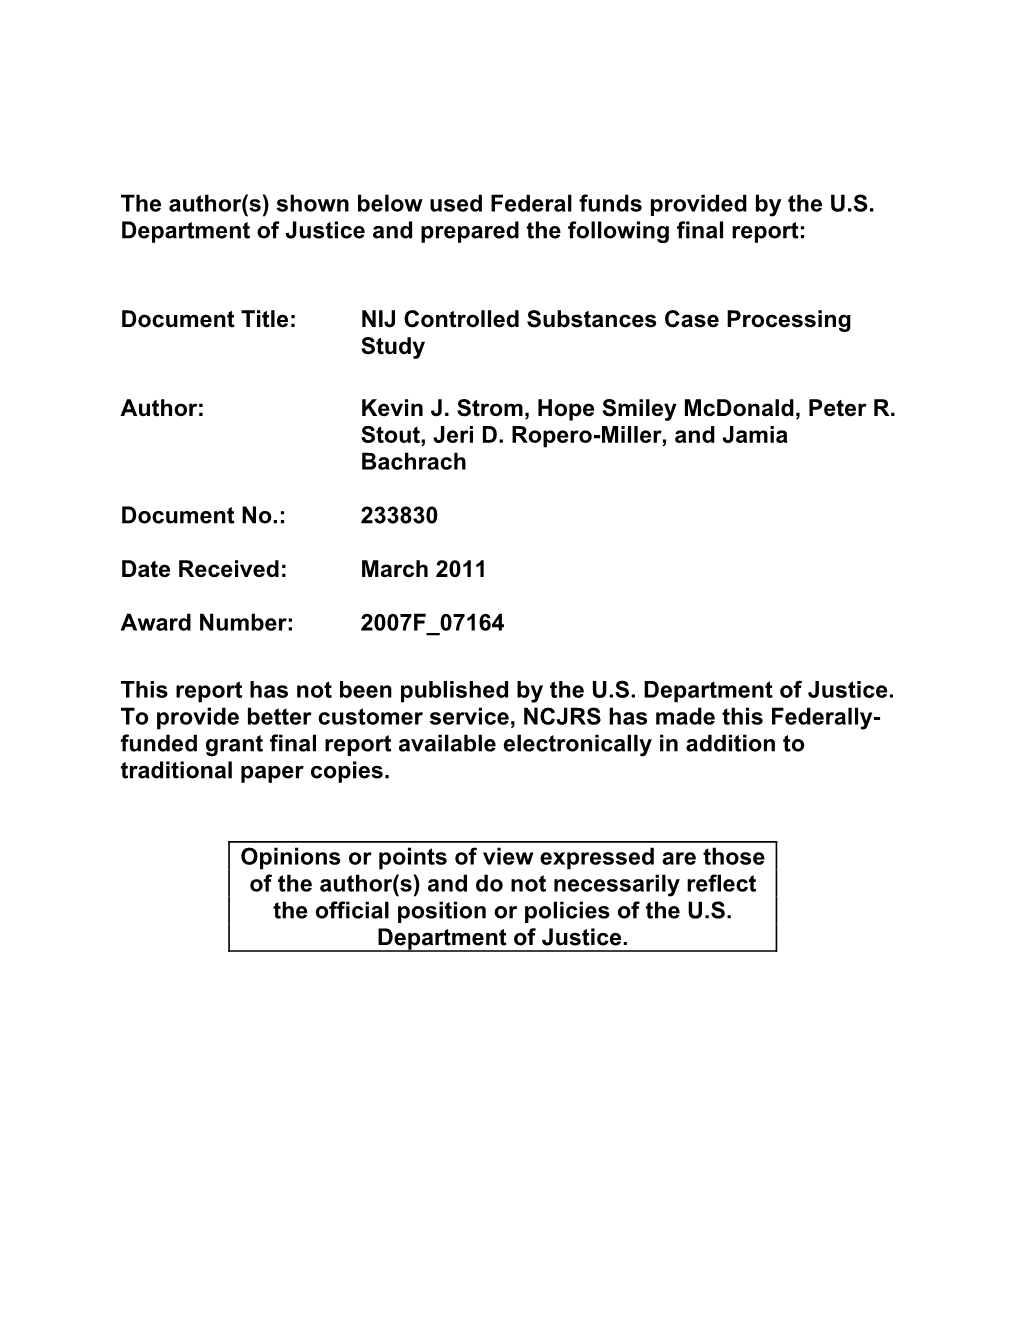 NIJ Controlled Substances Case Processing Study